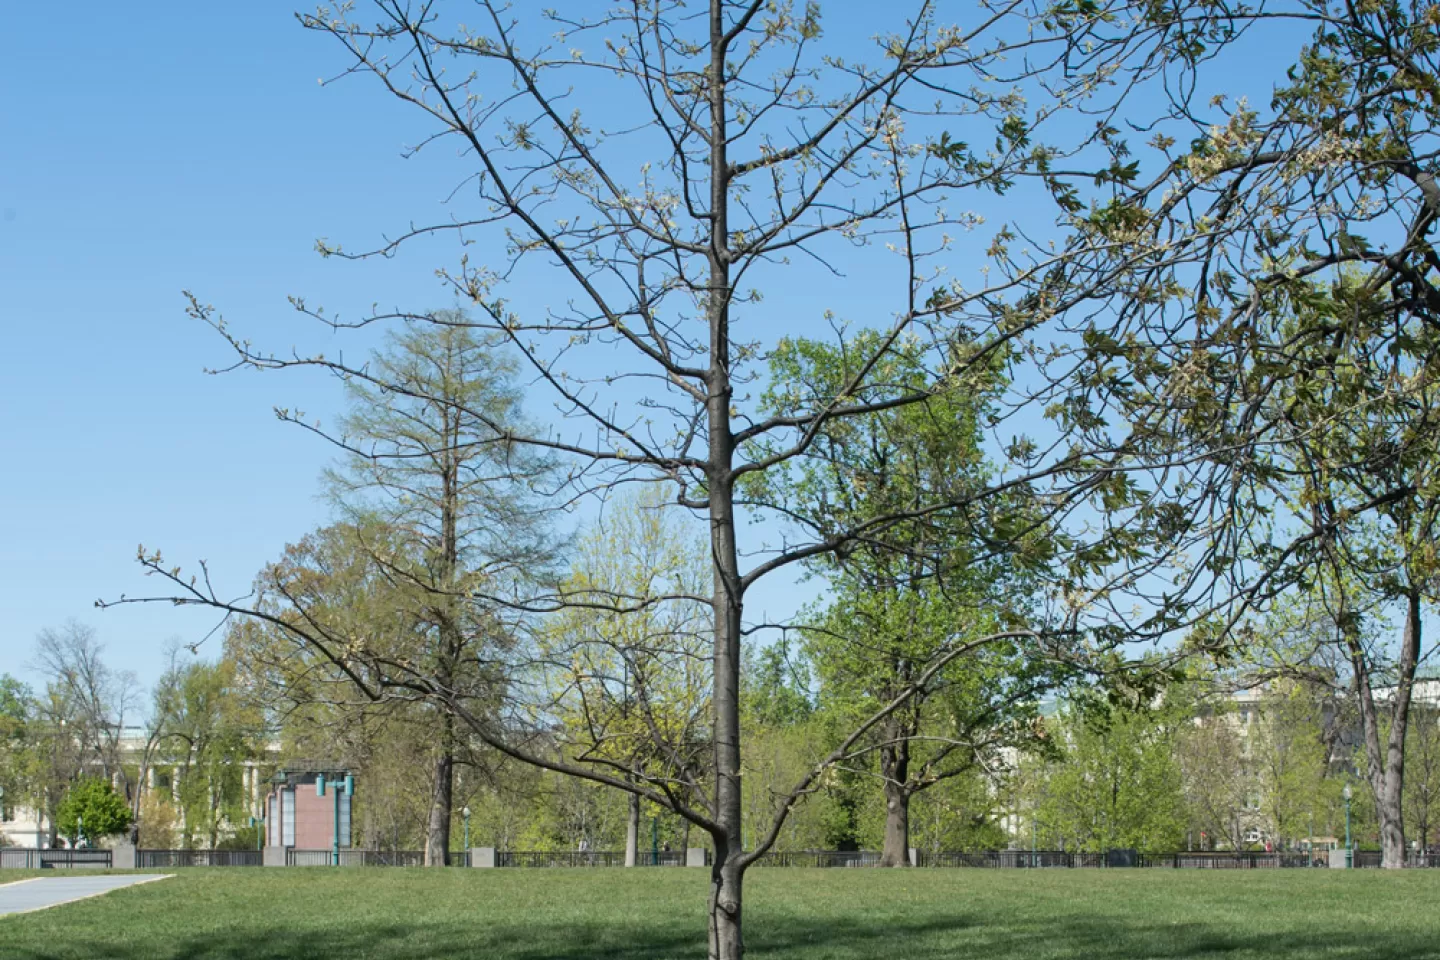 The Speaker Tip O'Neill tree on the U.S. Capitol Grounds during spring.